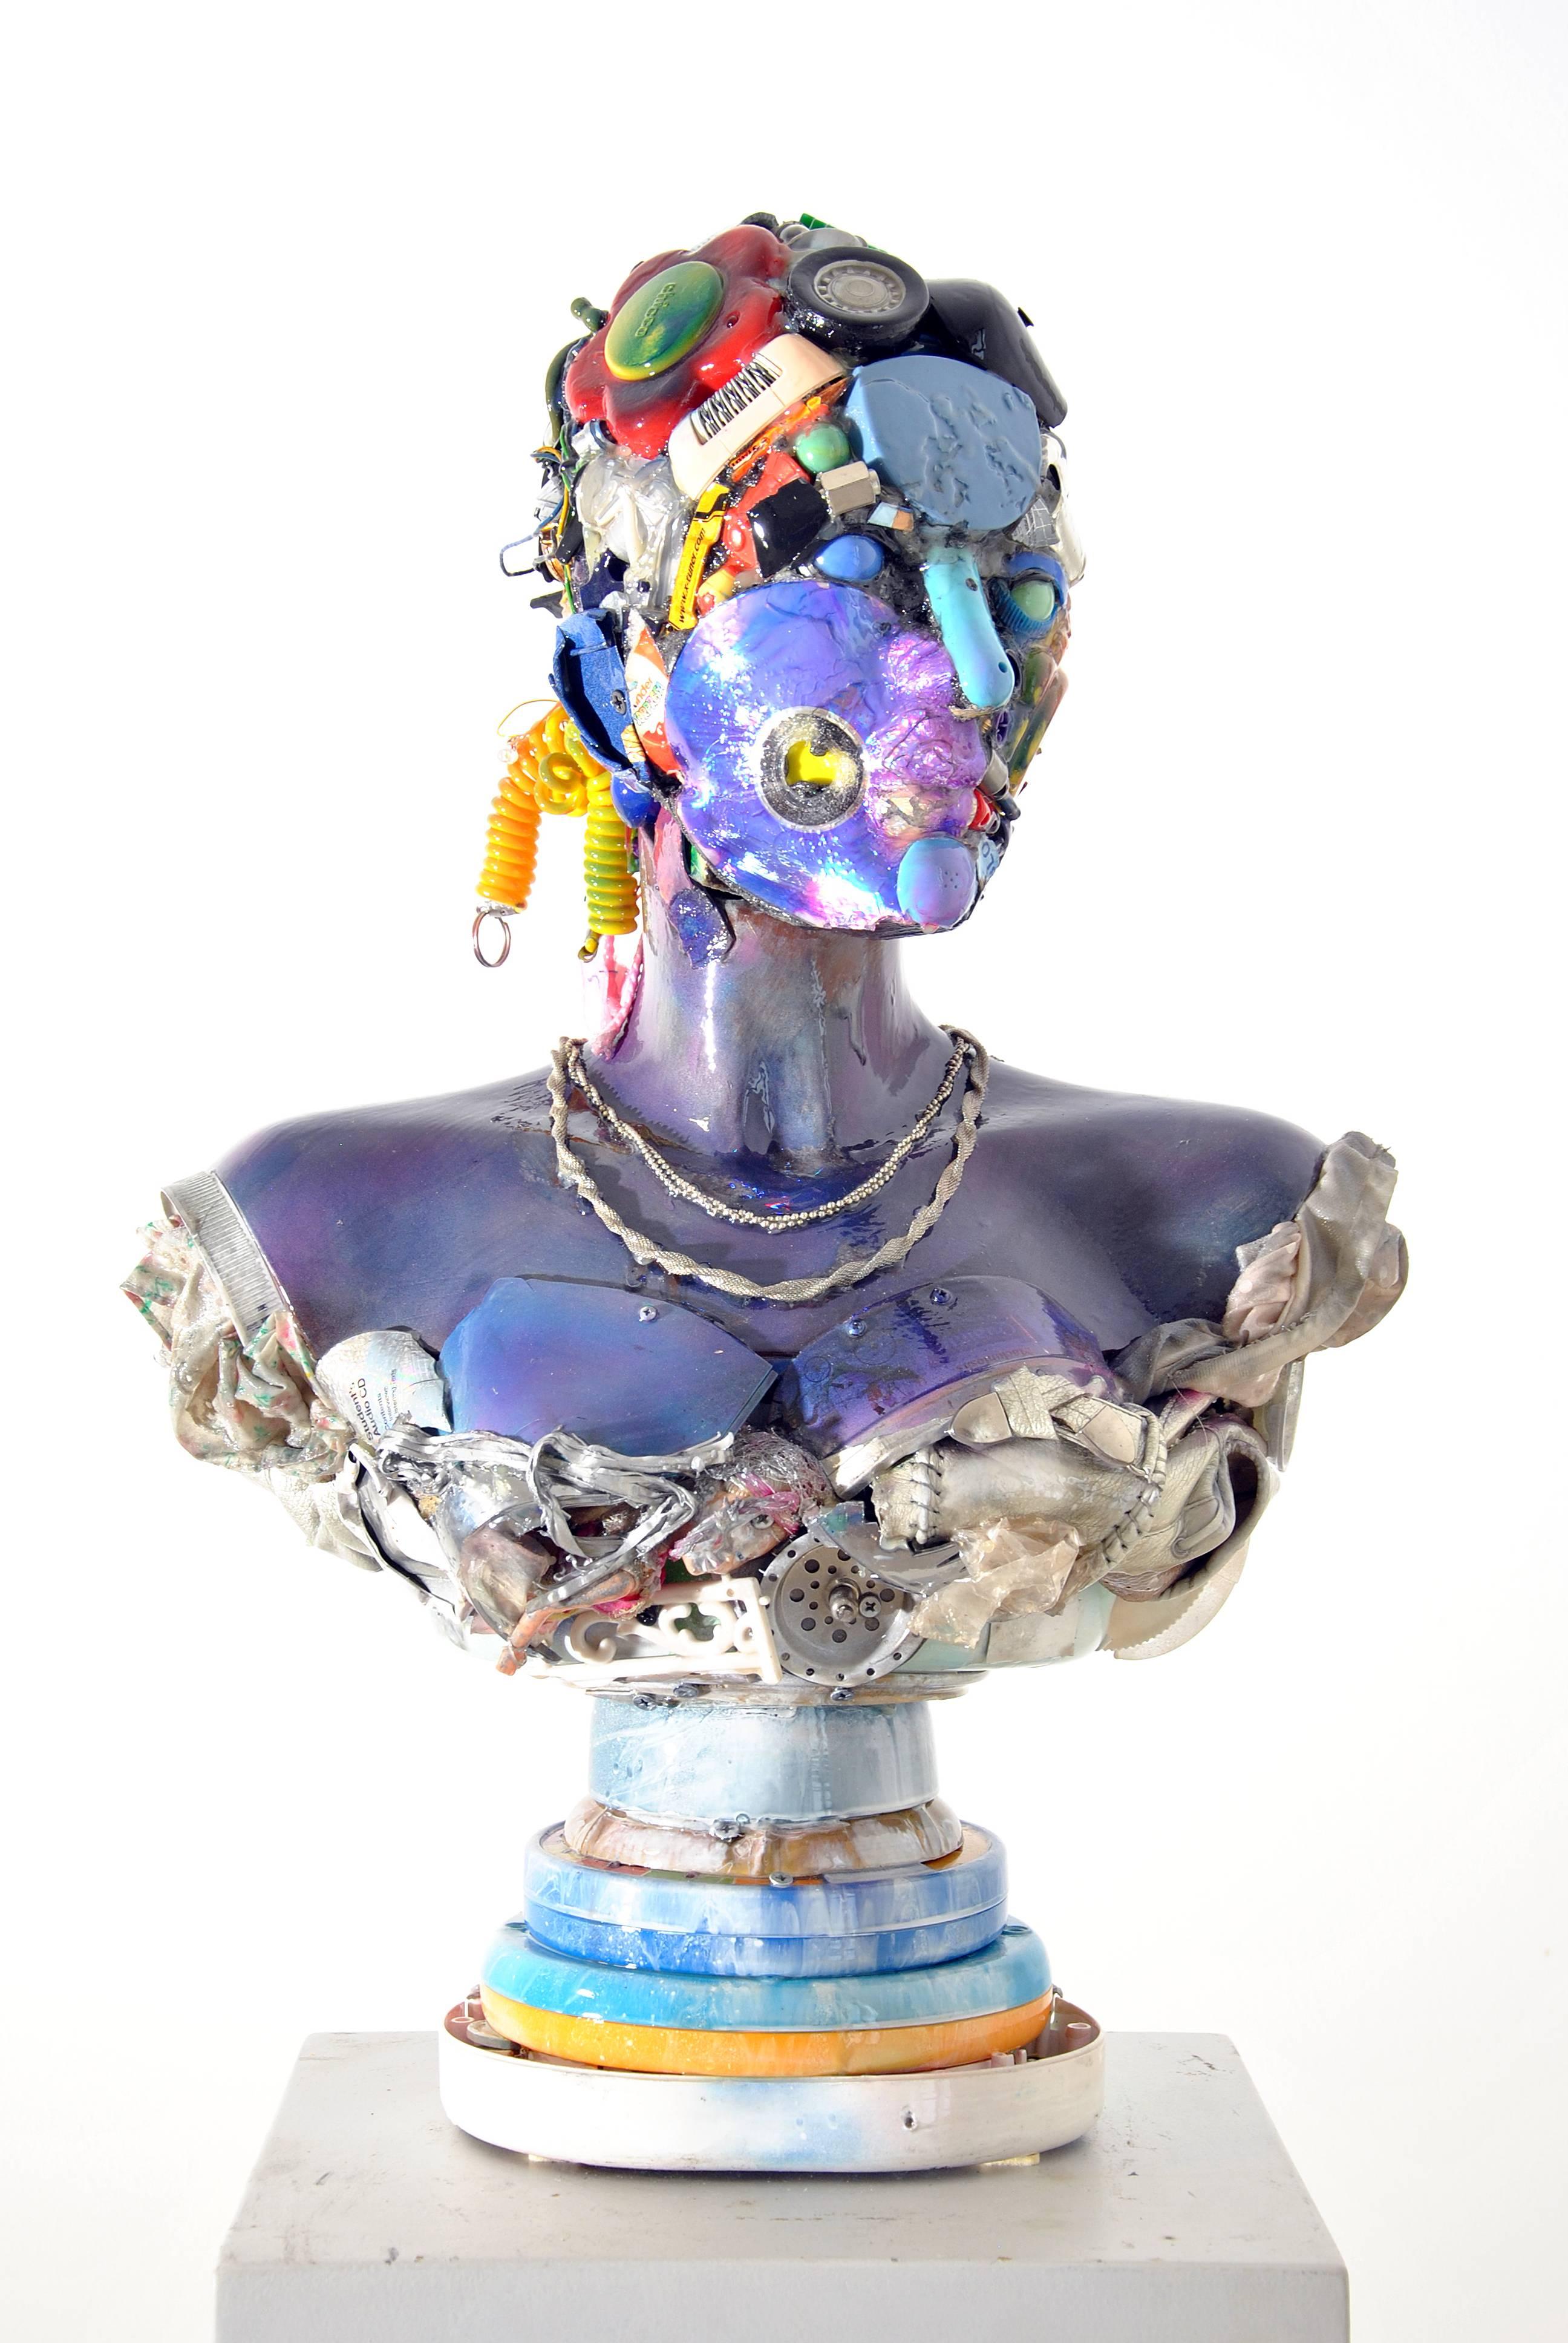 Dario Tironi - Donna Blu, 2016

Objects Assembly and Resin